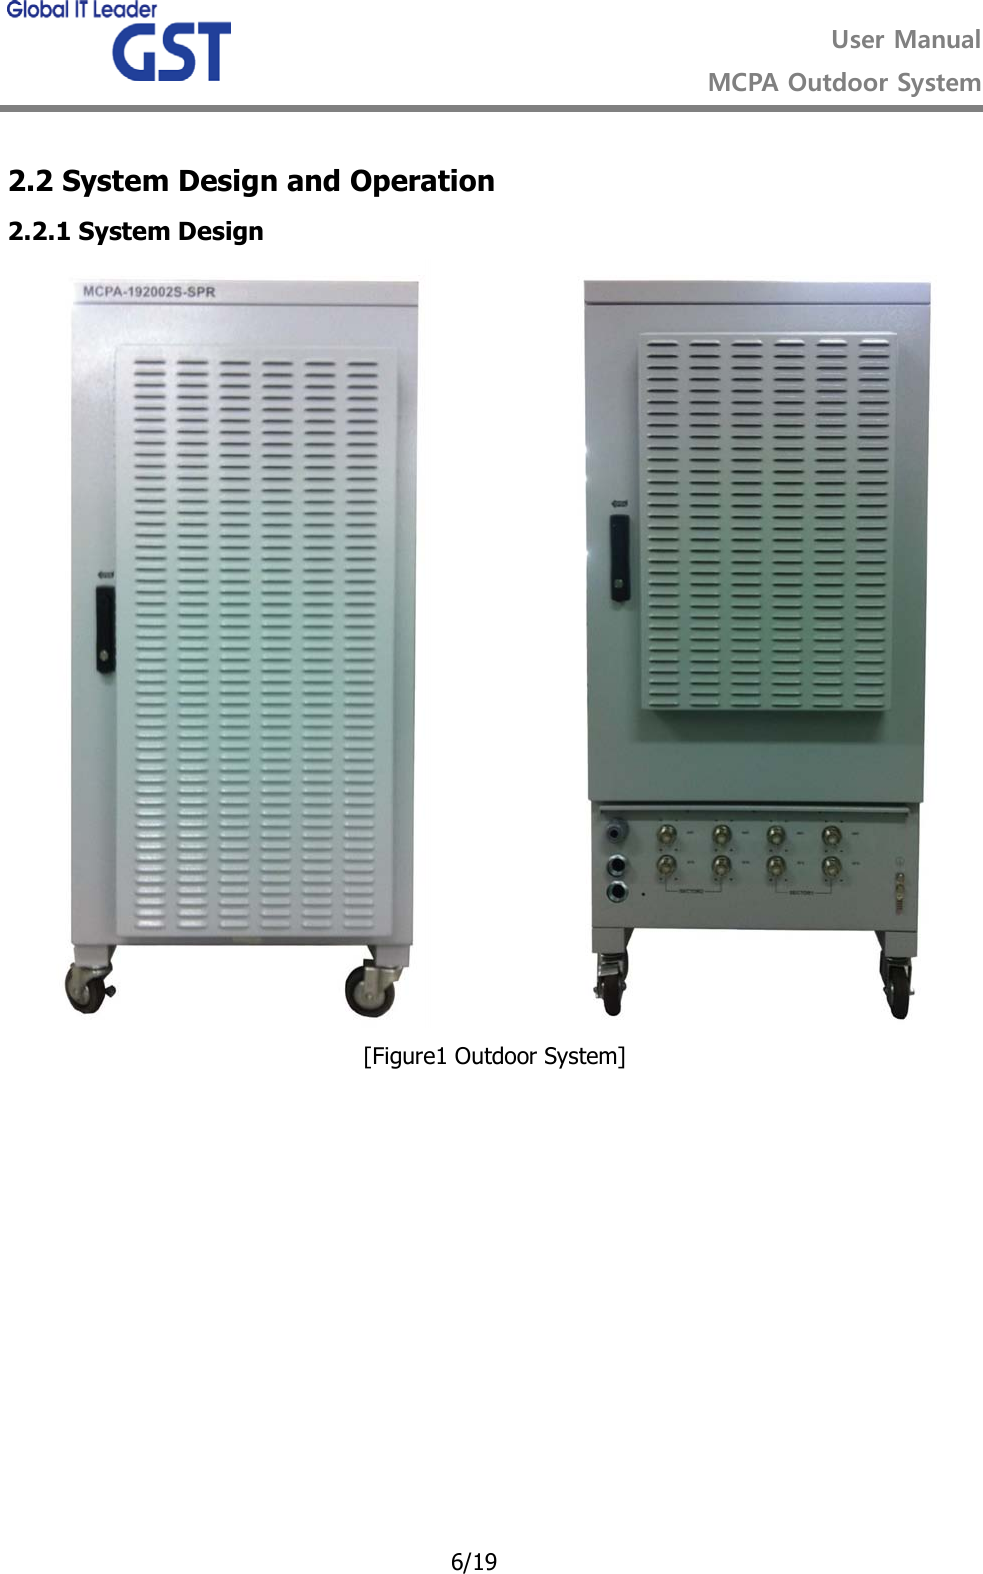  User Manual MCPA Outdoor System   6/19 2.2 System Design and Operation 2.2.1 System Design  [Figure1 Outdoor System]          